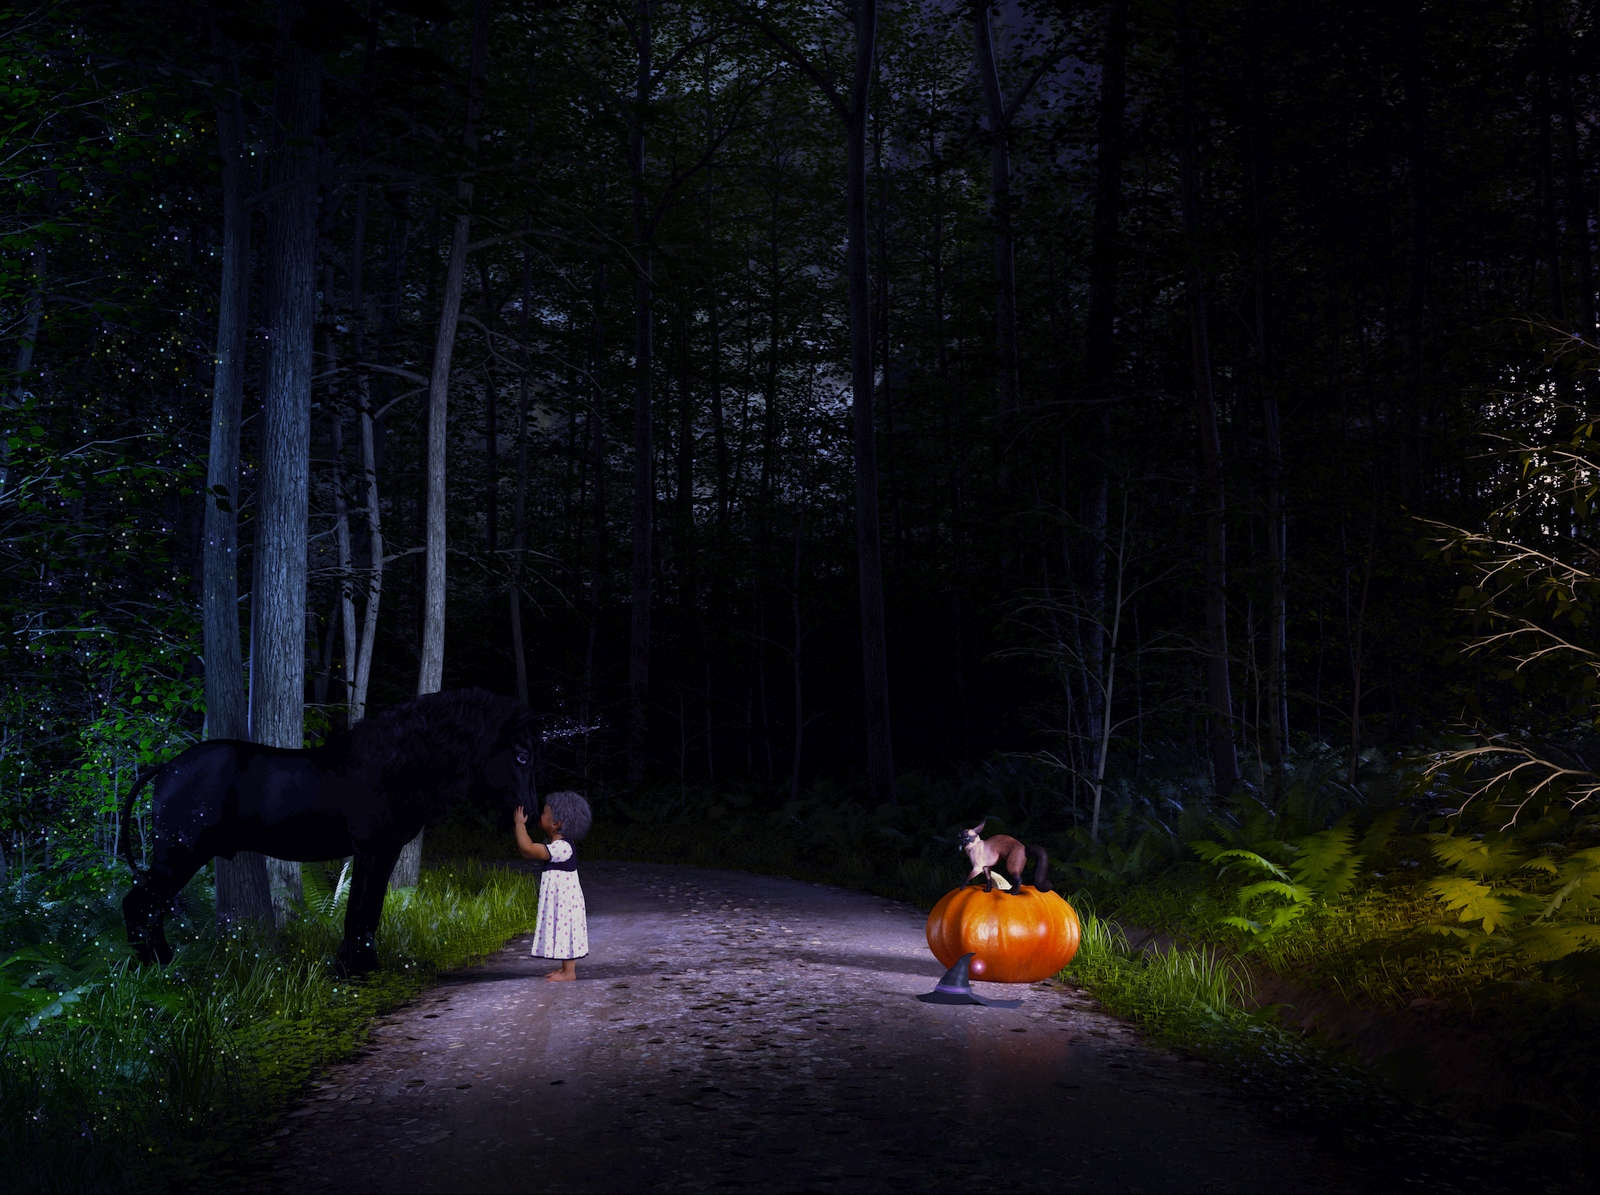 On the Path to Halloween